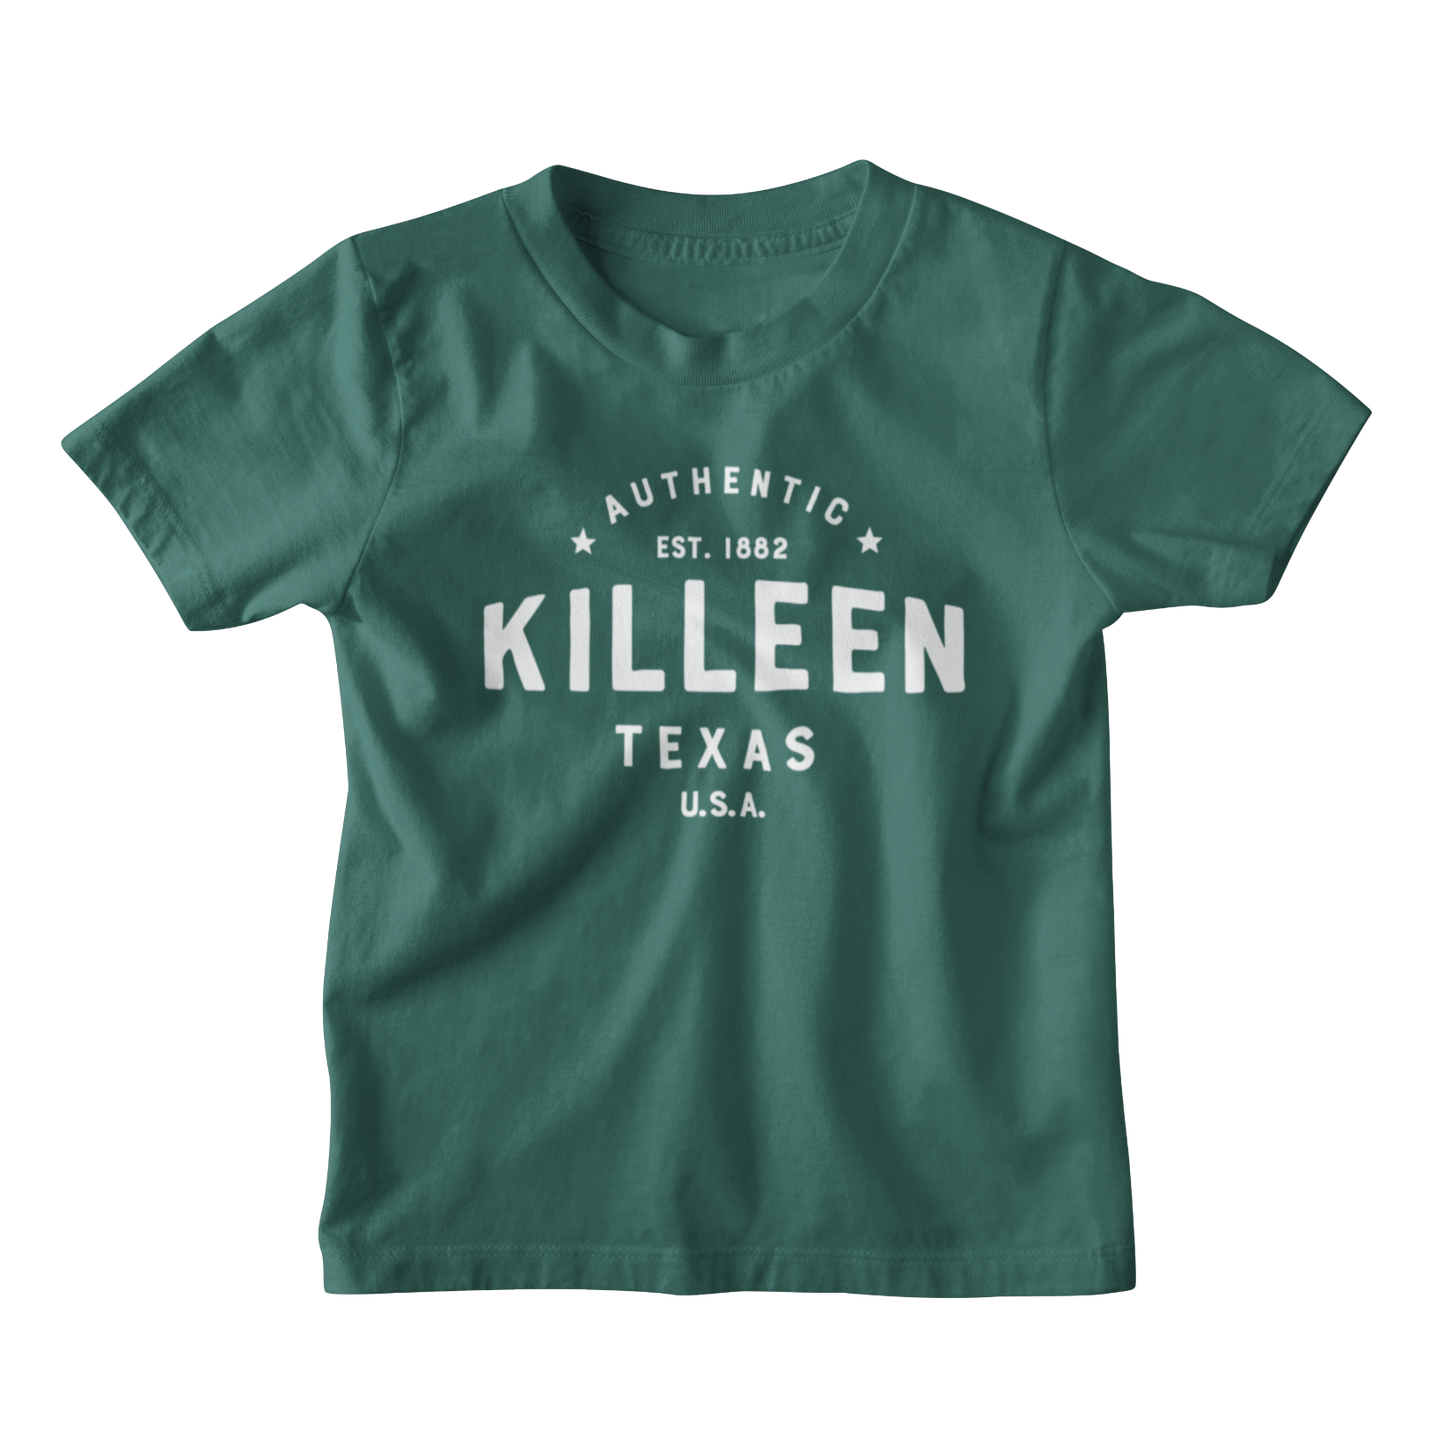 Killeen Texas Youth T-shirt - Authentic